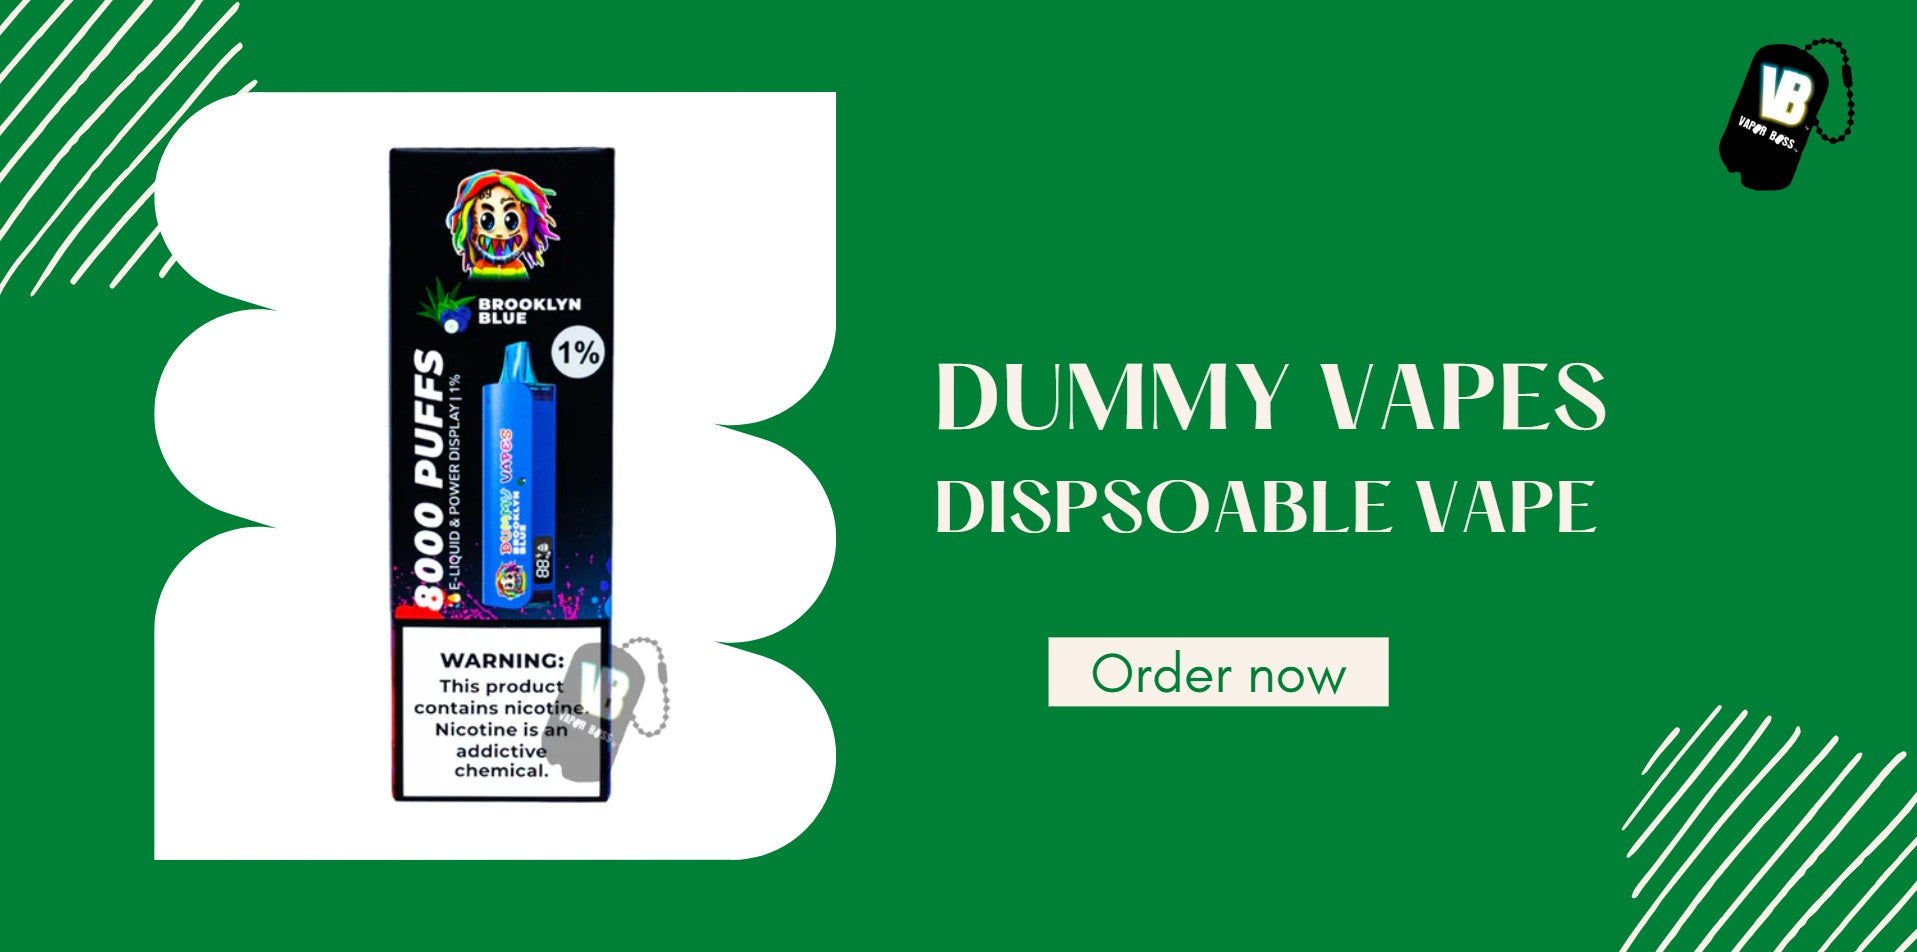 Dummy Vapes Disposable Review: Is It Worth the Hype? A Candid Evaluation